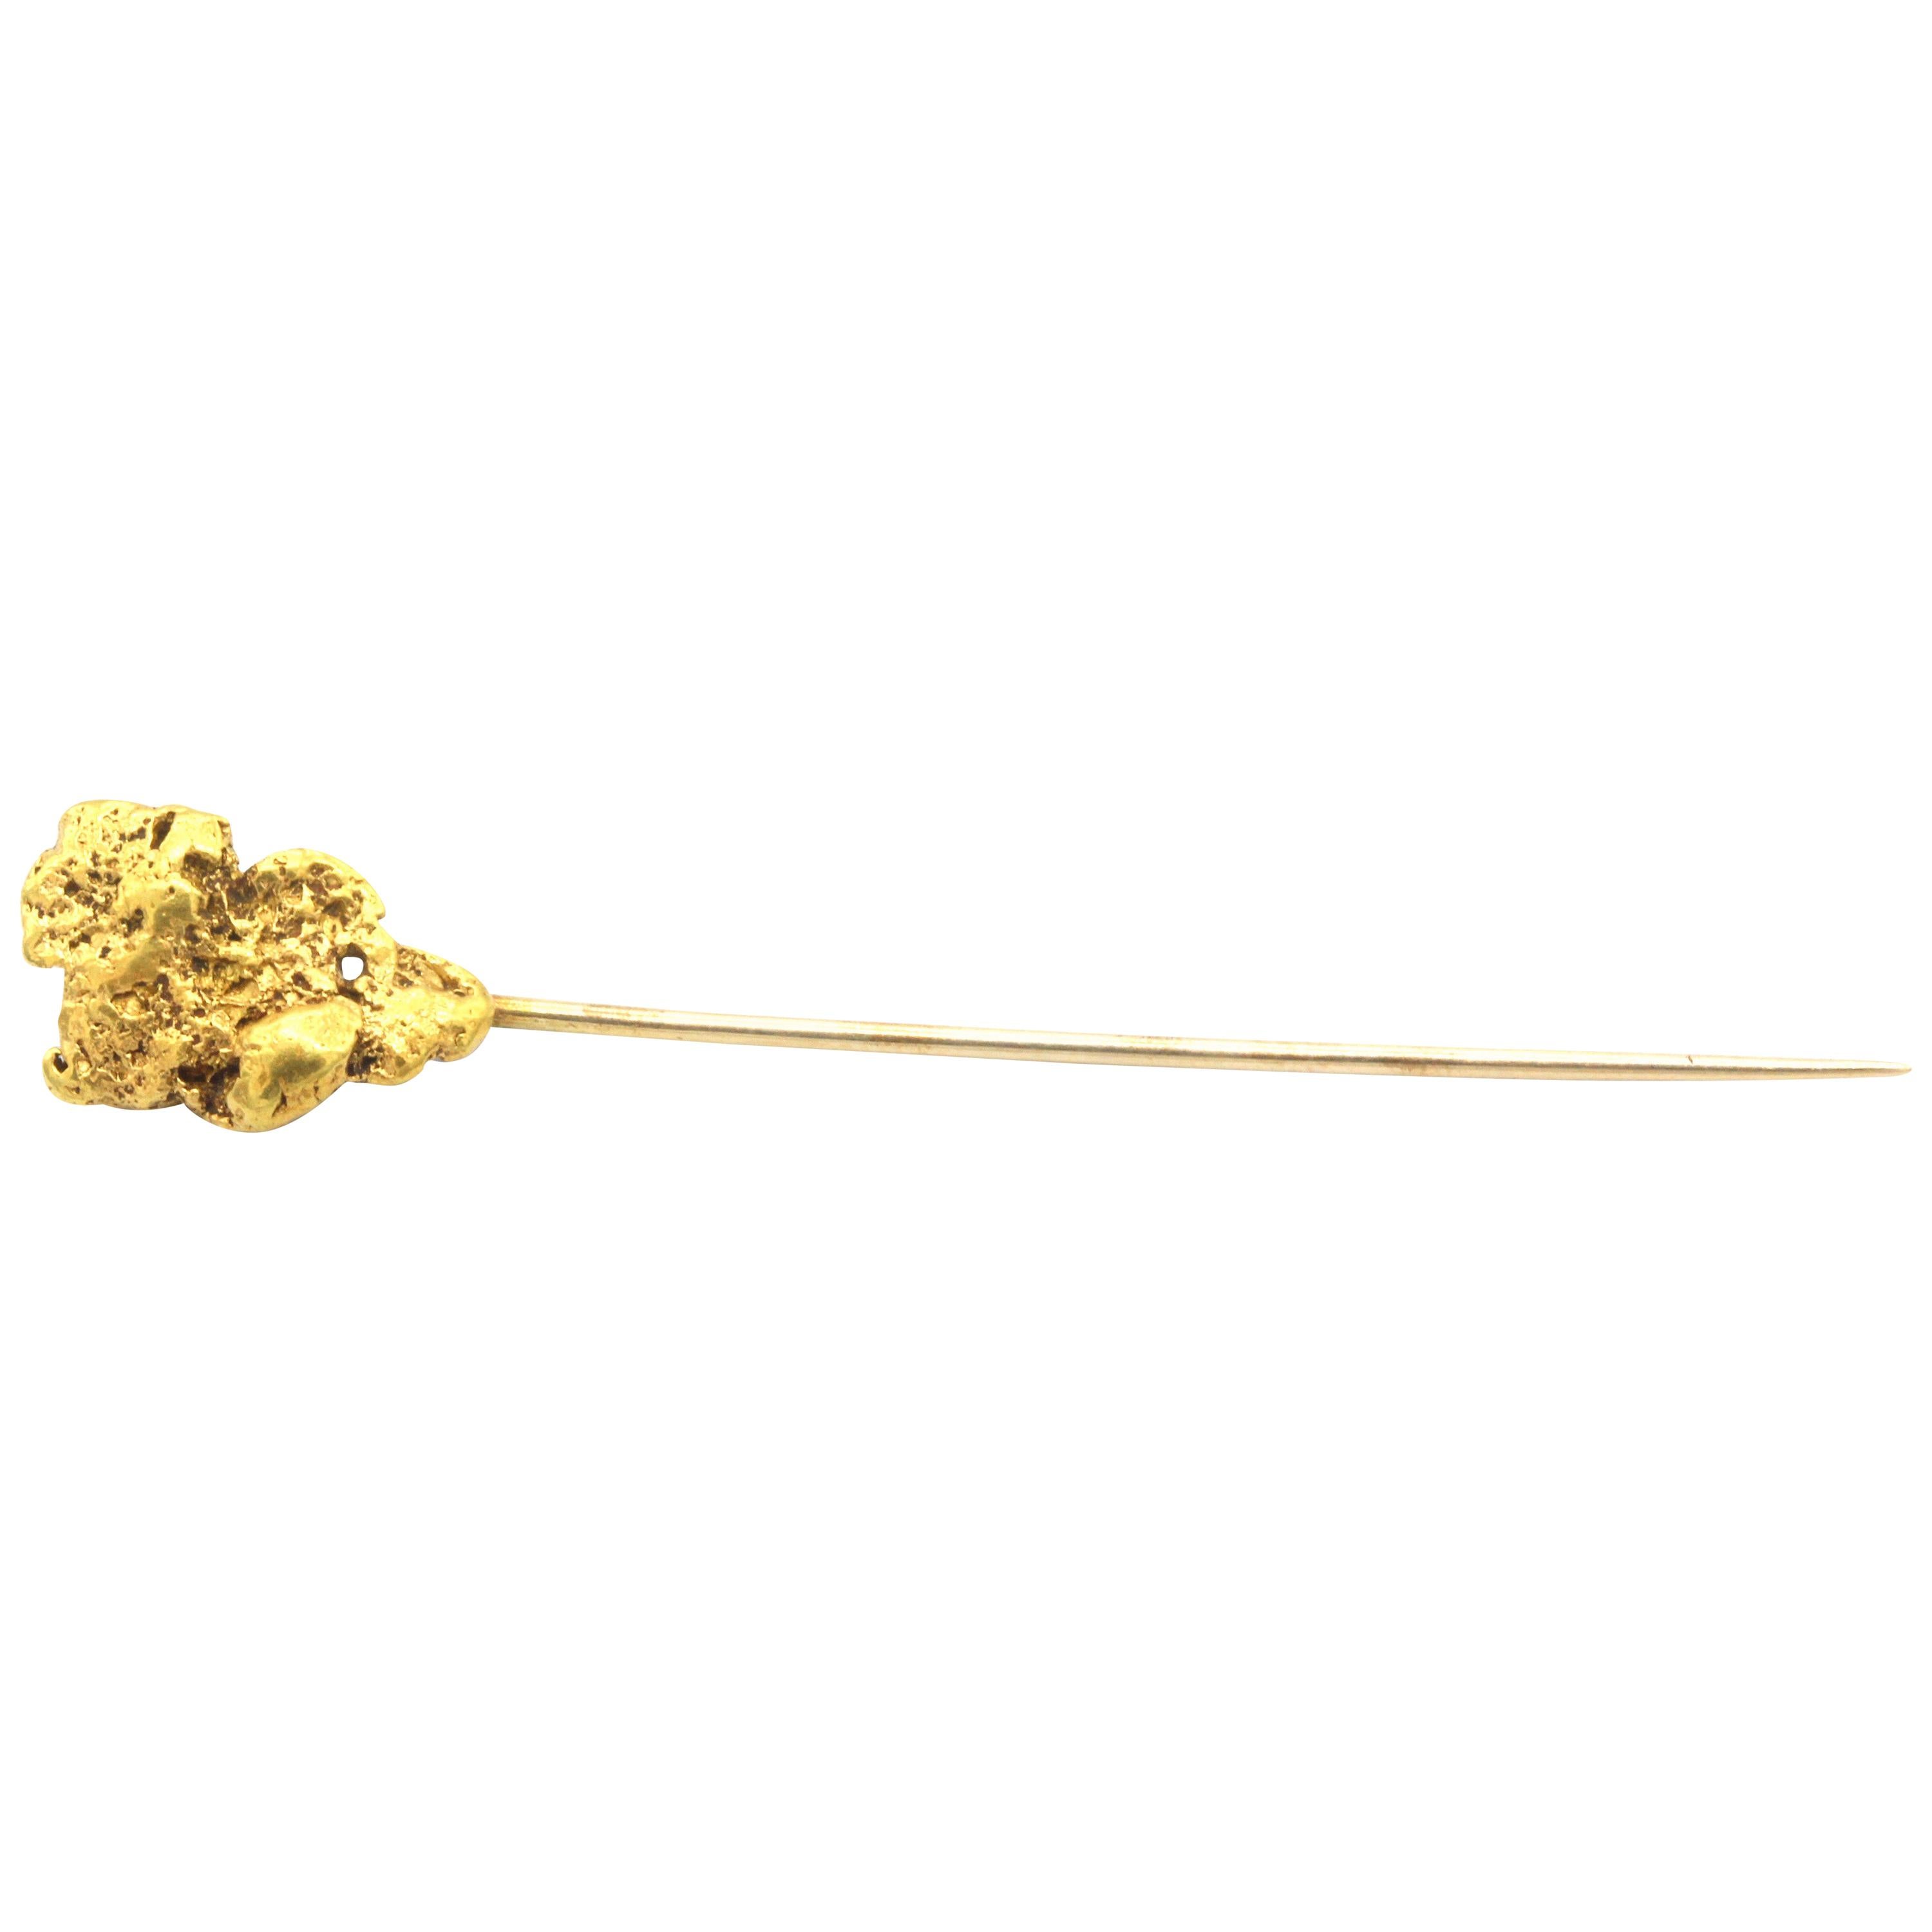 24 Kt Raw Gold Nugget Stick Pin For Sale